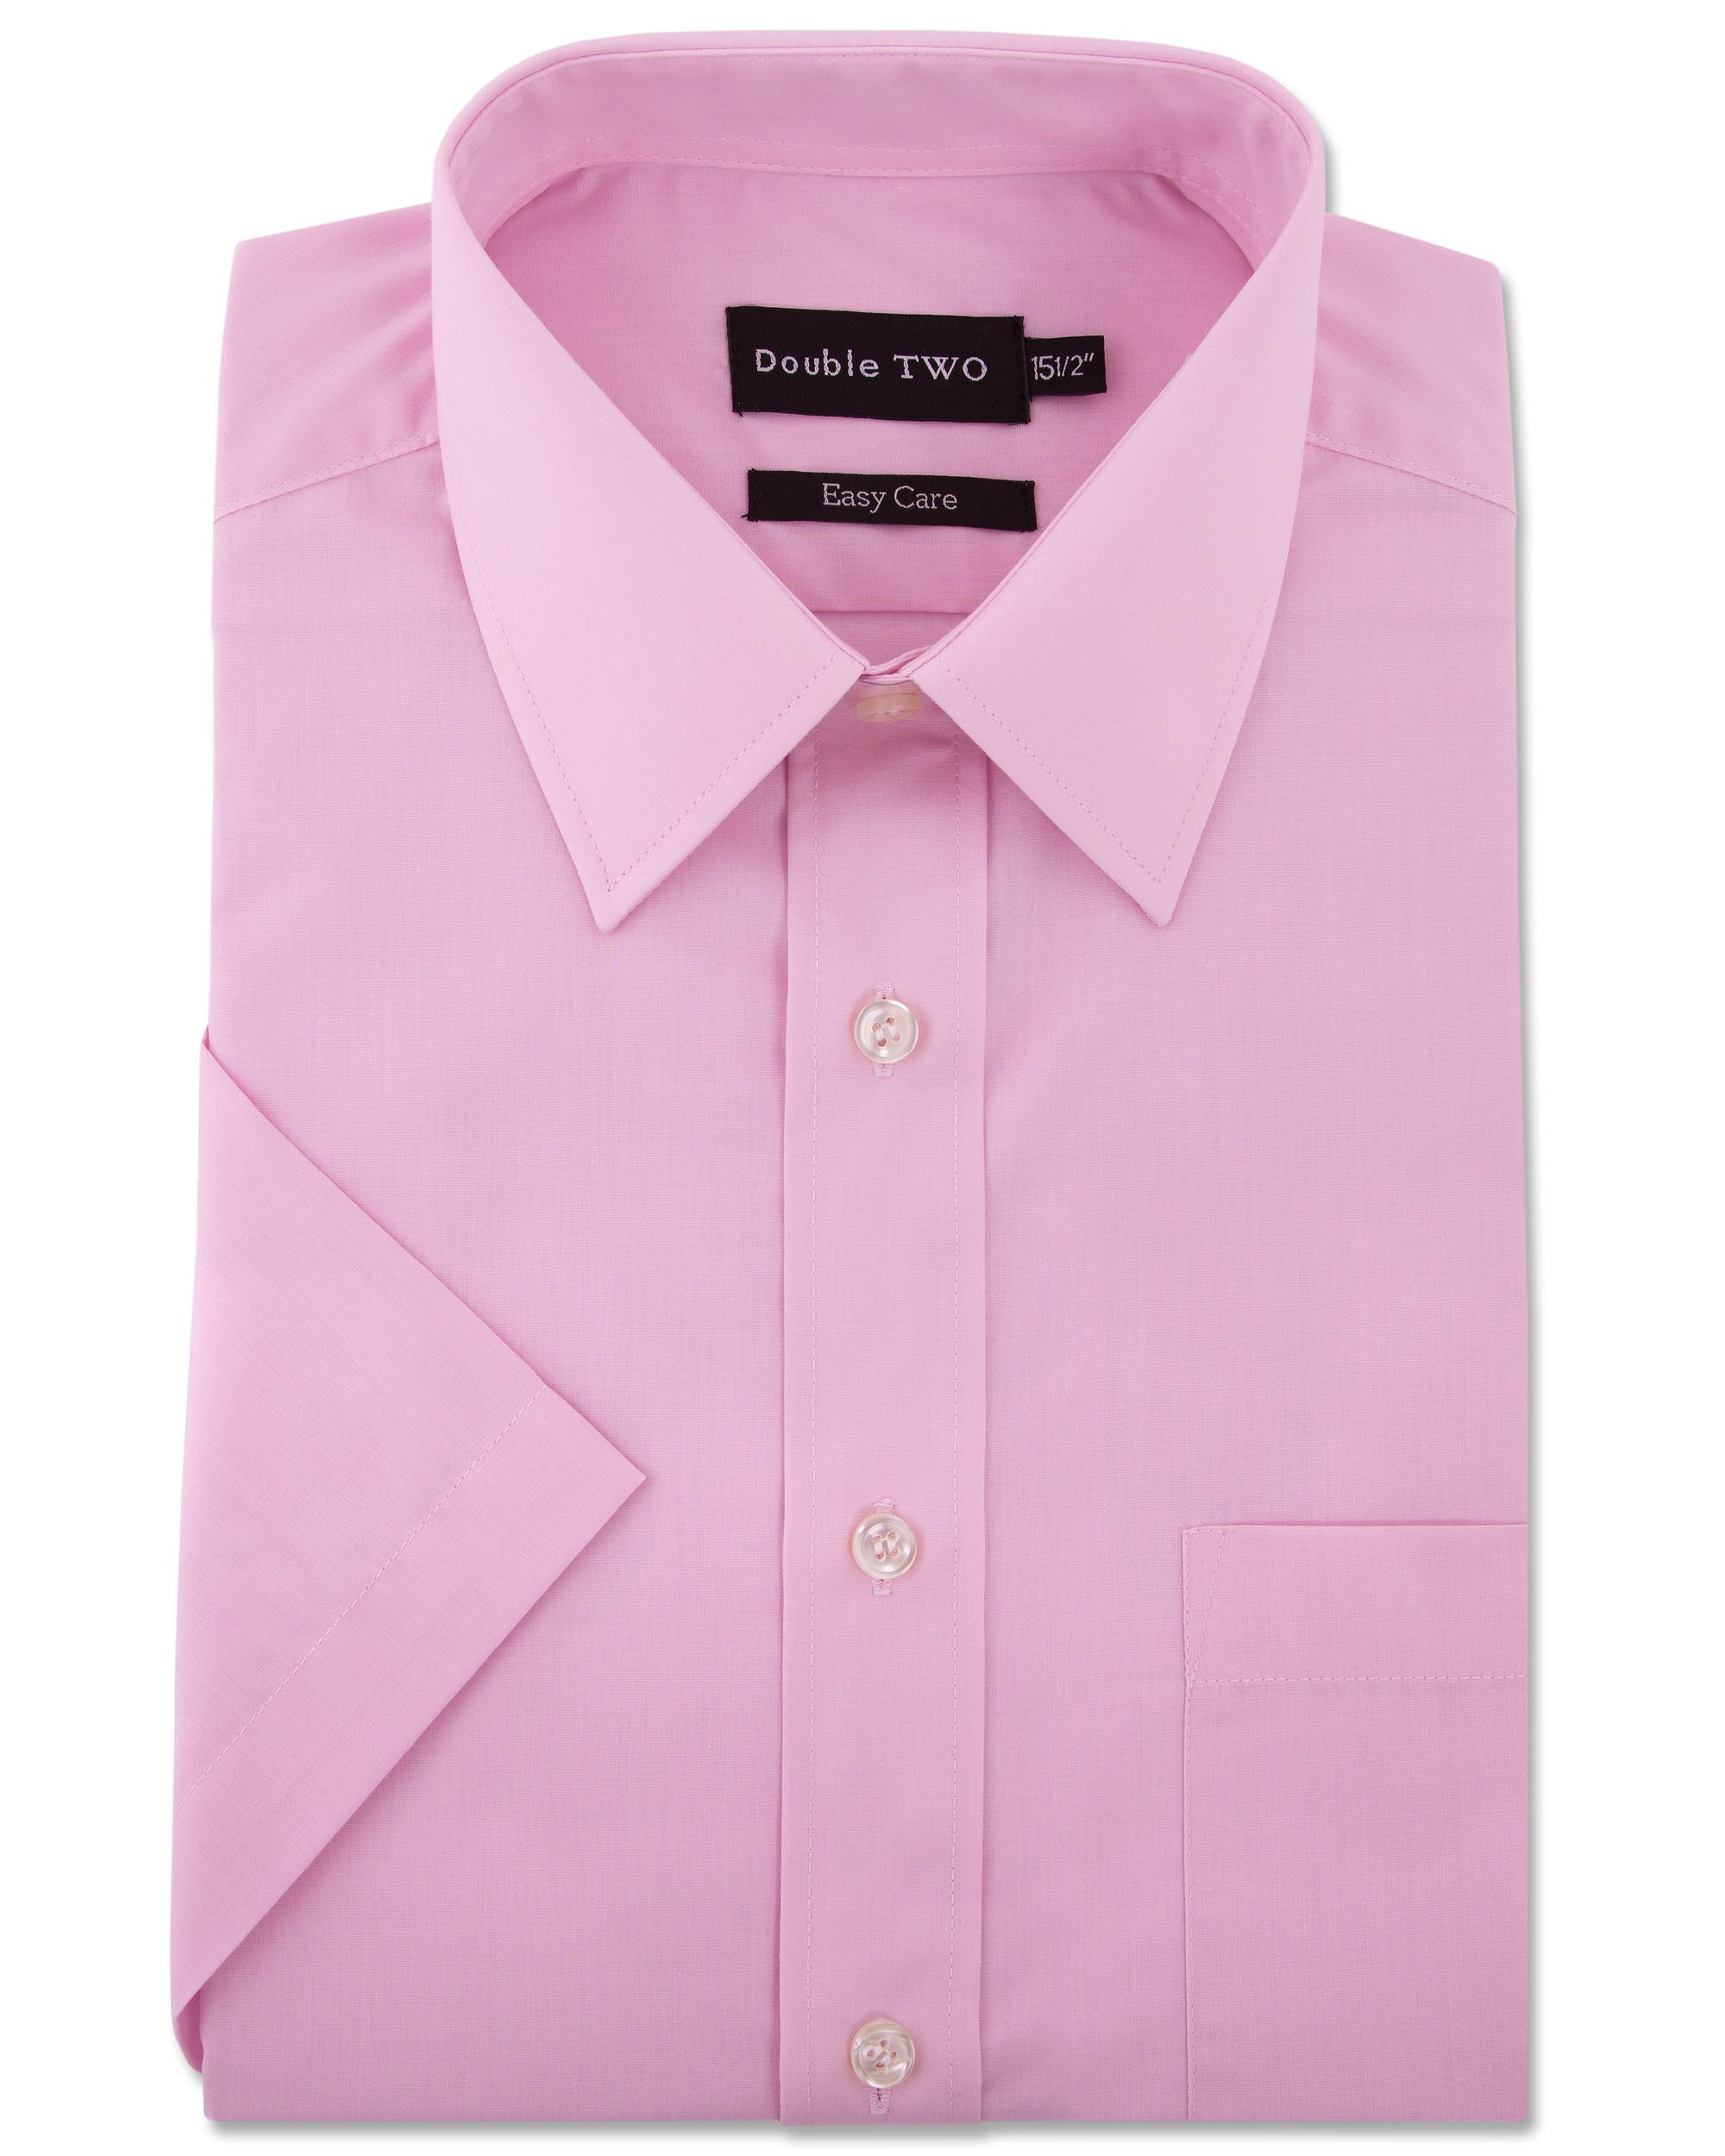 Men's Double TWO Short Sleeve Easy Care Shirt | Sugdens | Corporate ...